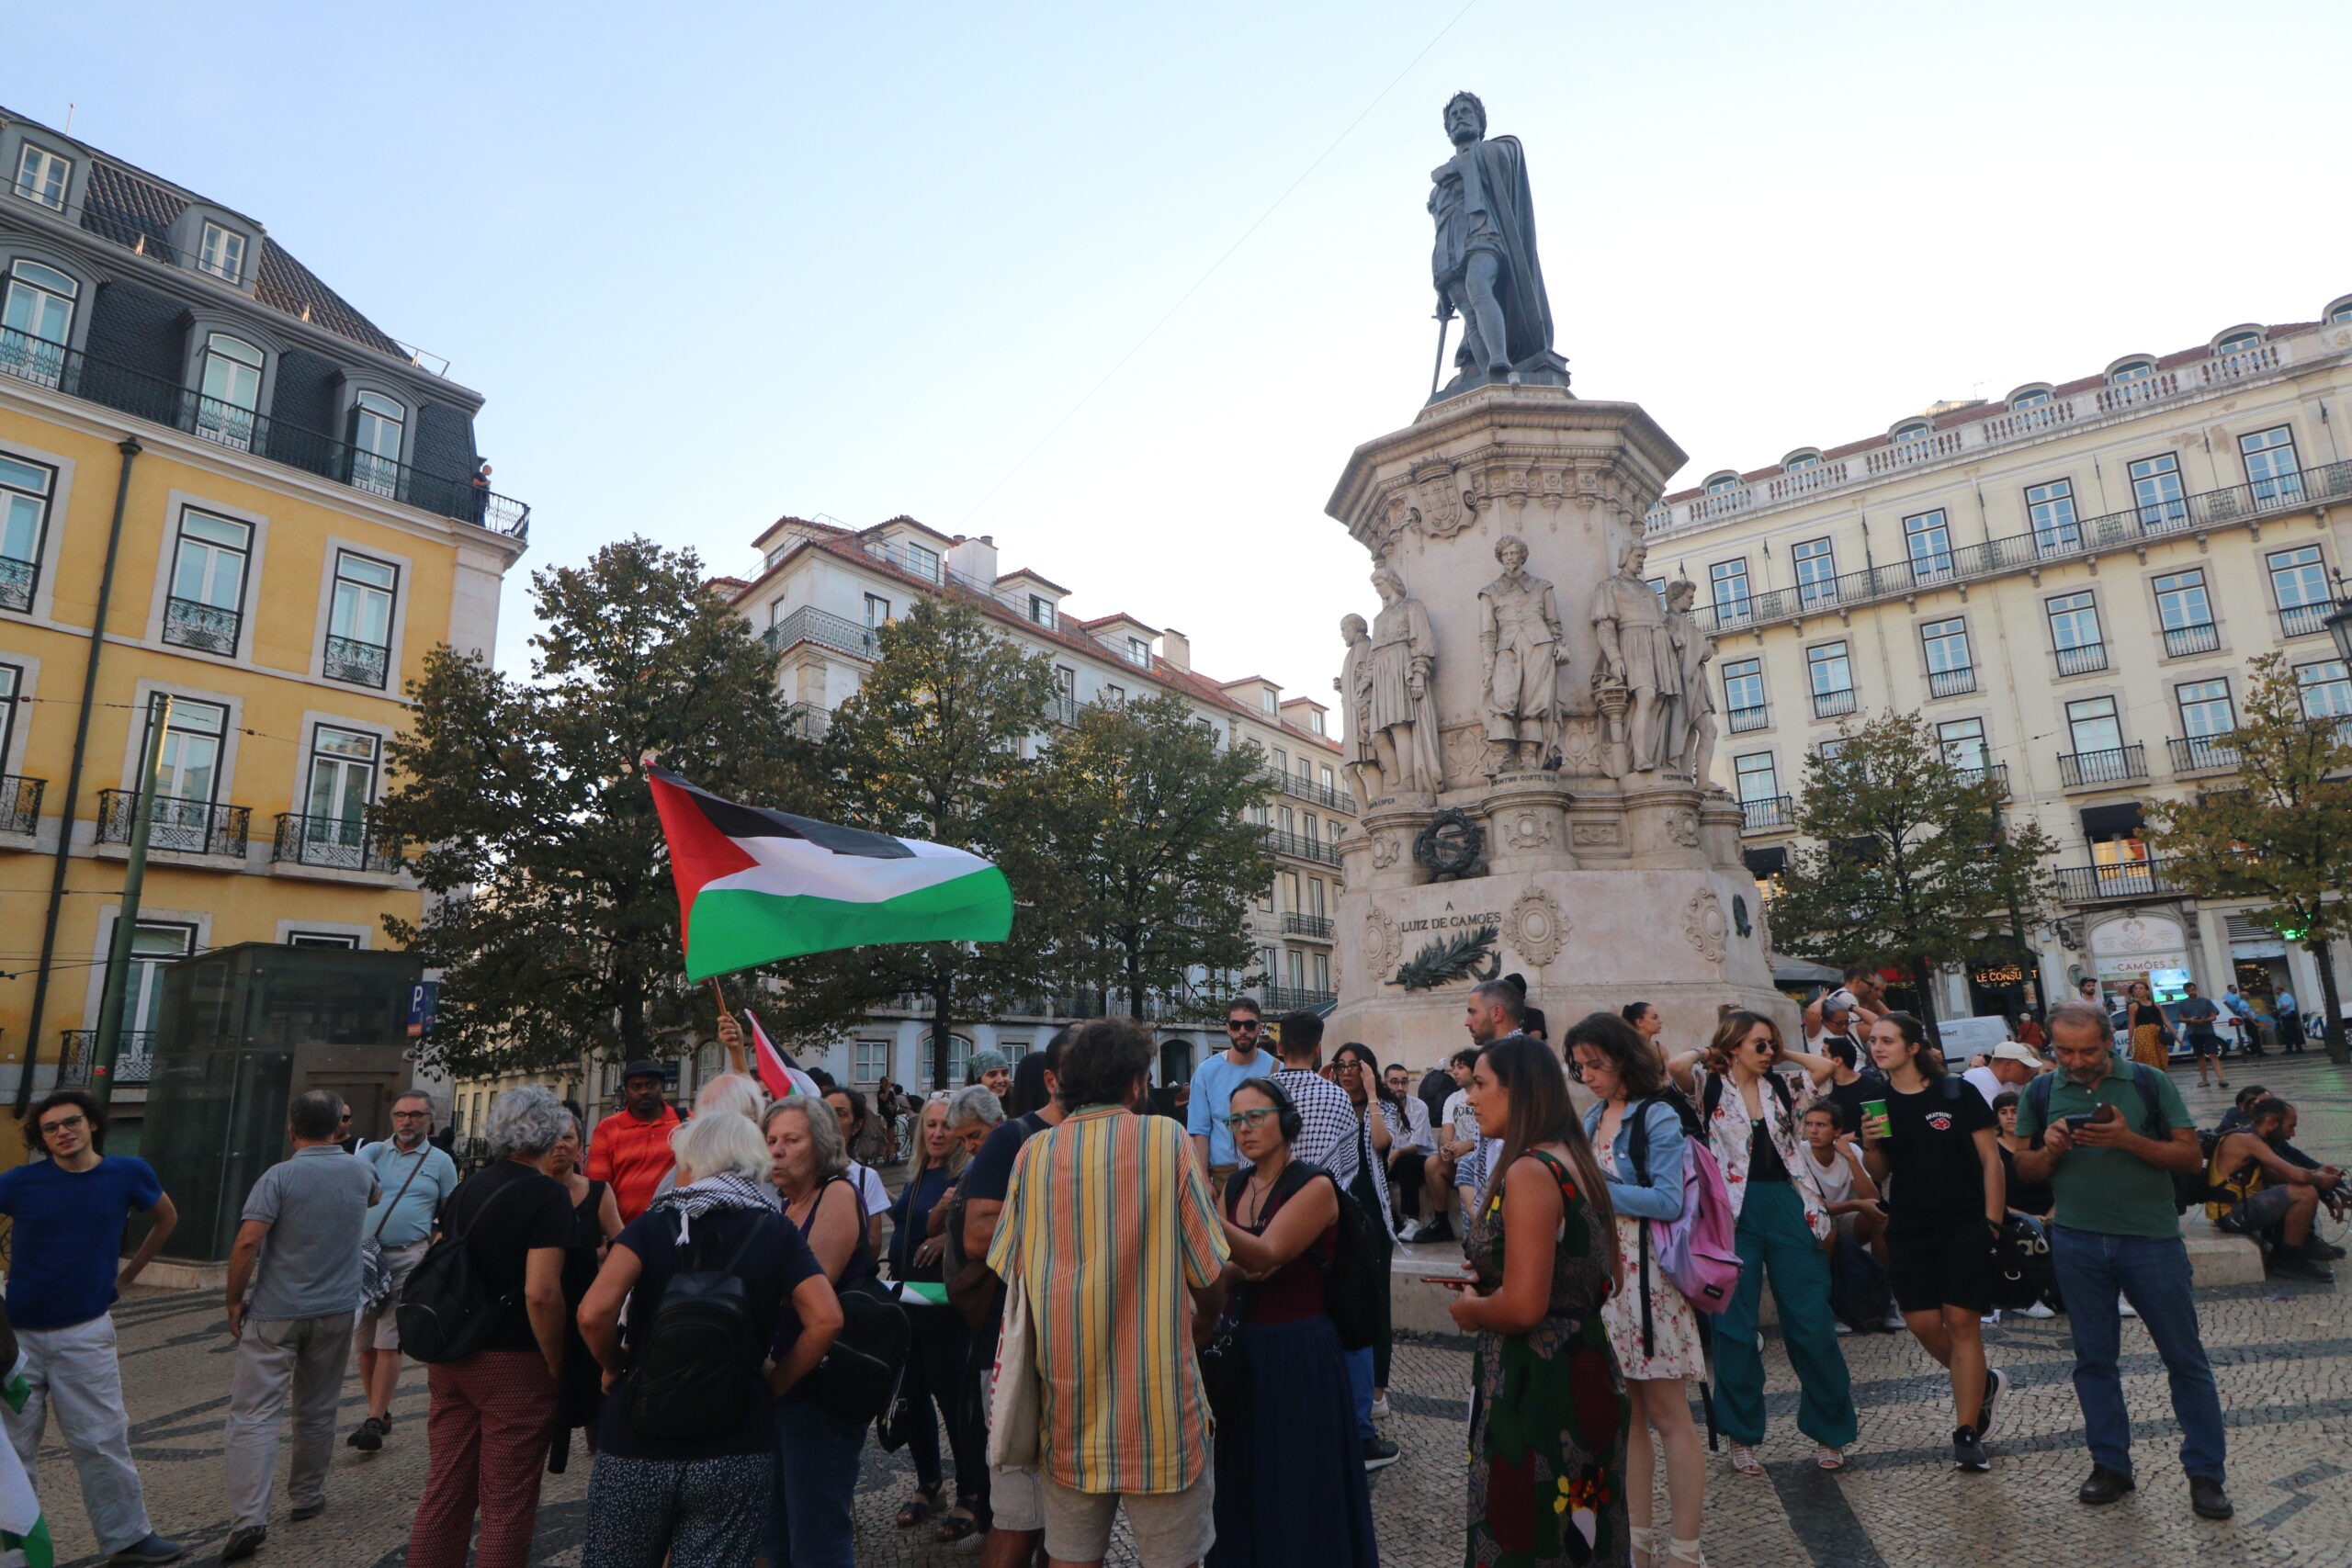 Pro-palestinian gathering in Lisbon. These seemingly nice people support murderers and rapists